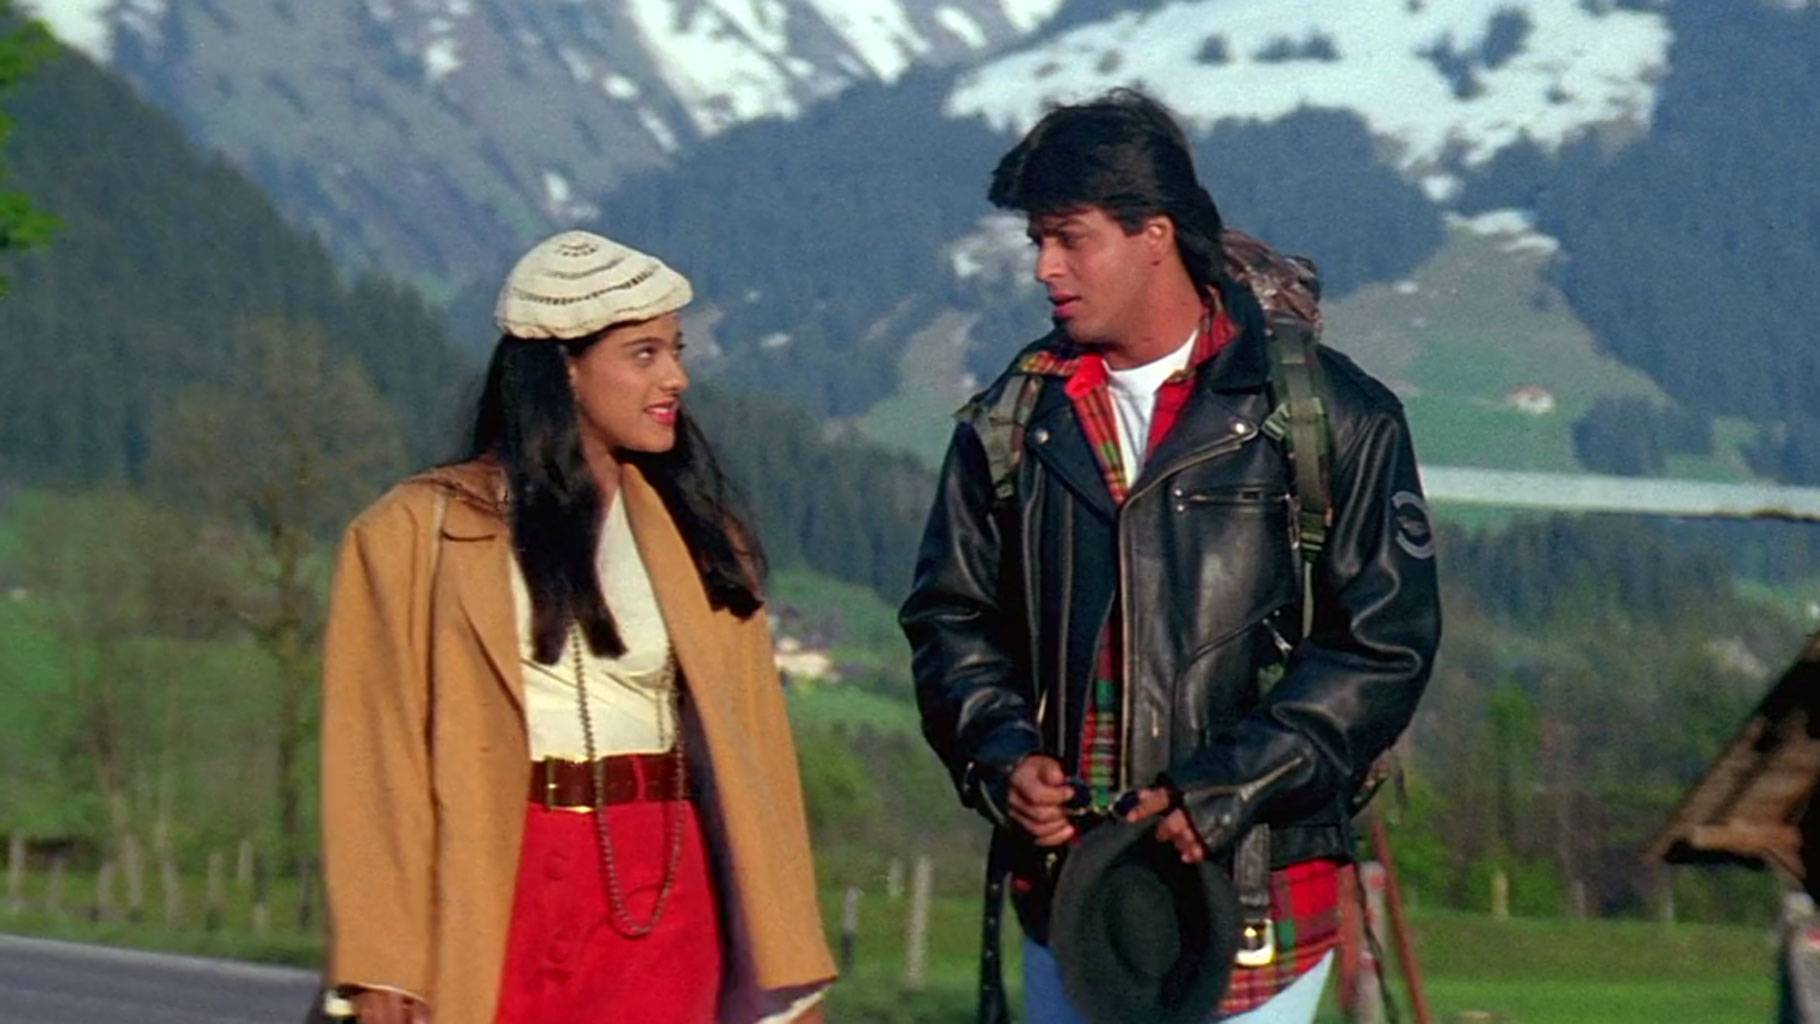 Shah Rukh Khan and Kajol in the romantic movie "The Groom Takes the Bride".